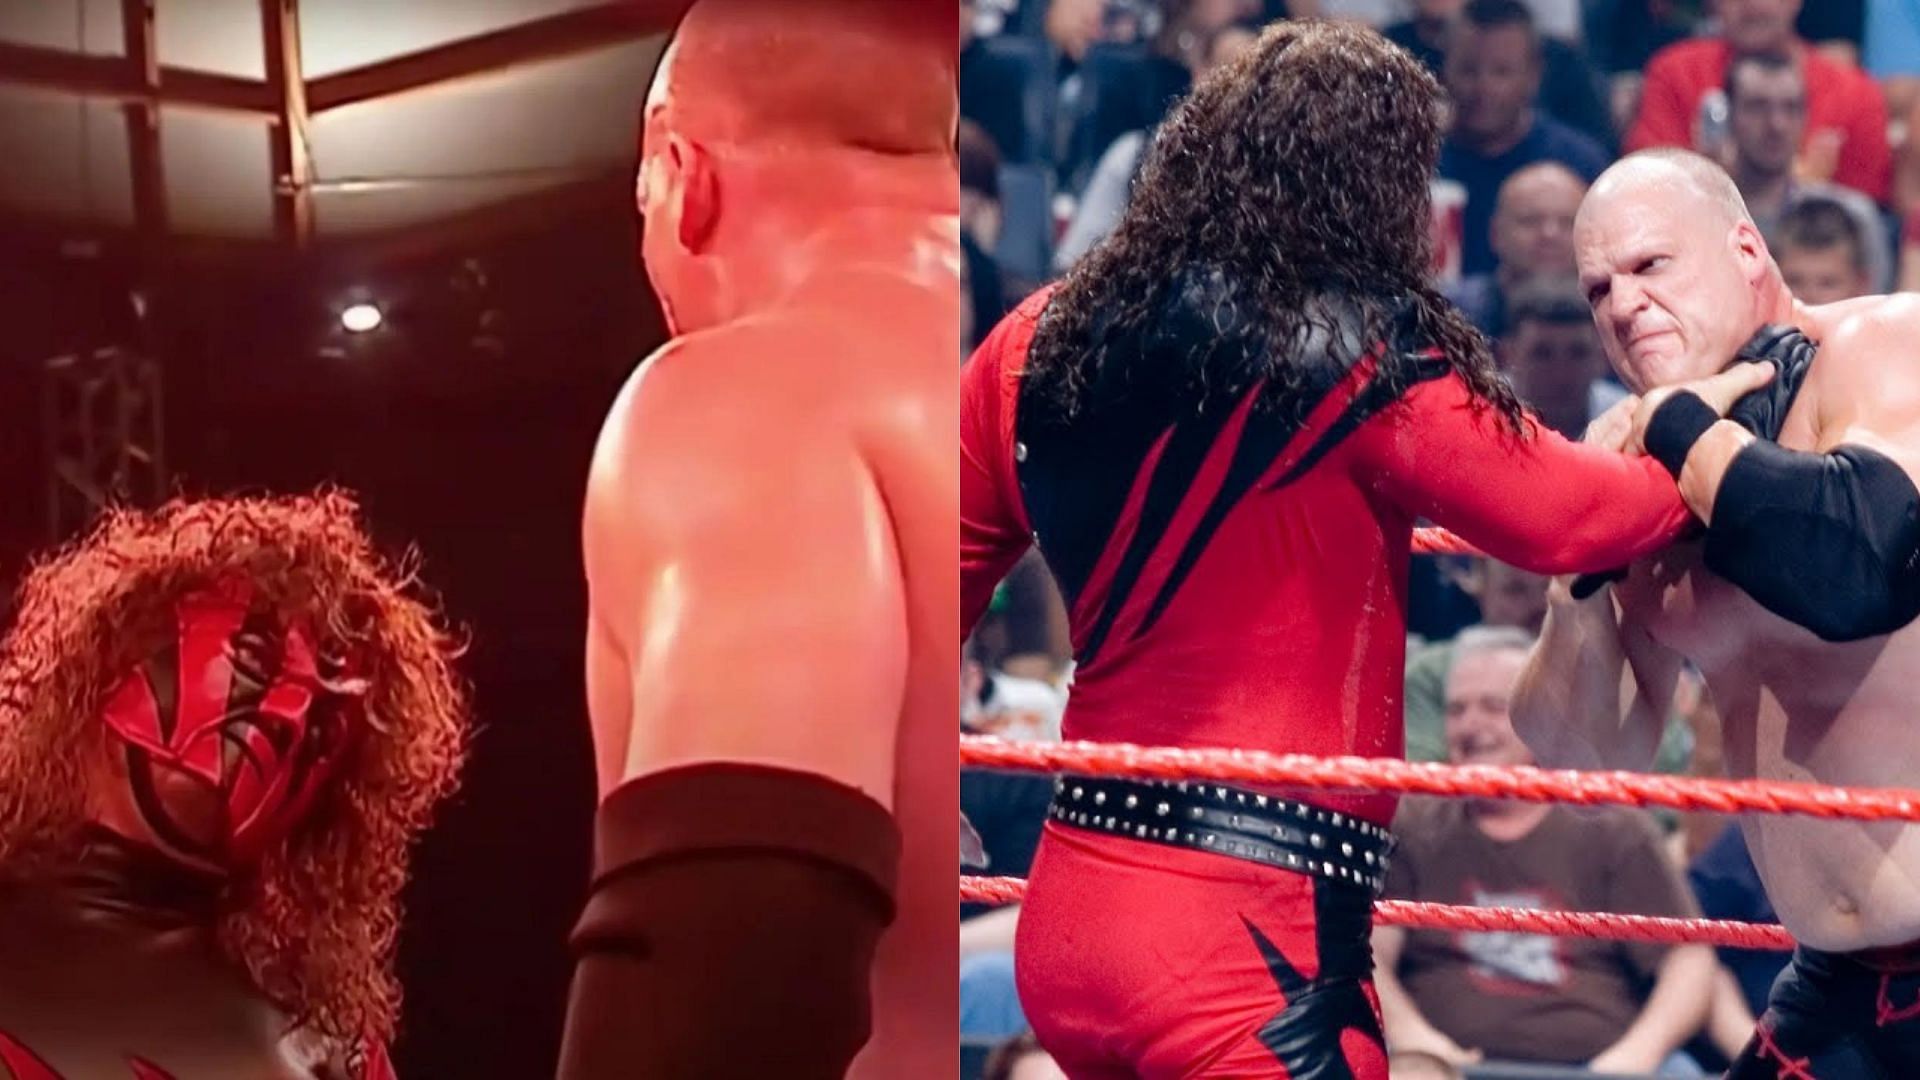 WWE Superstar Kane with his imposter